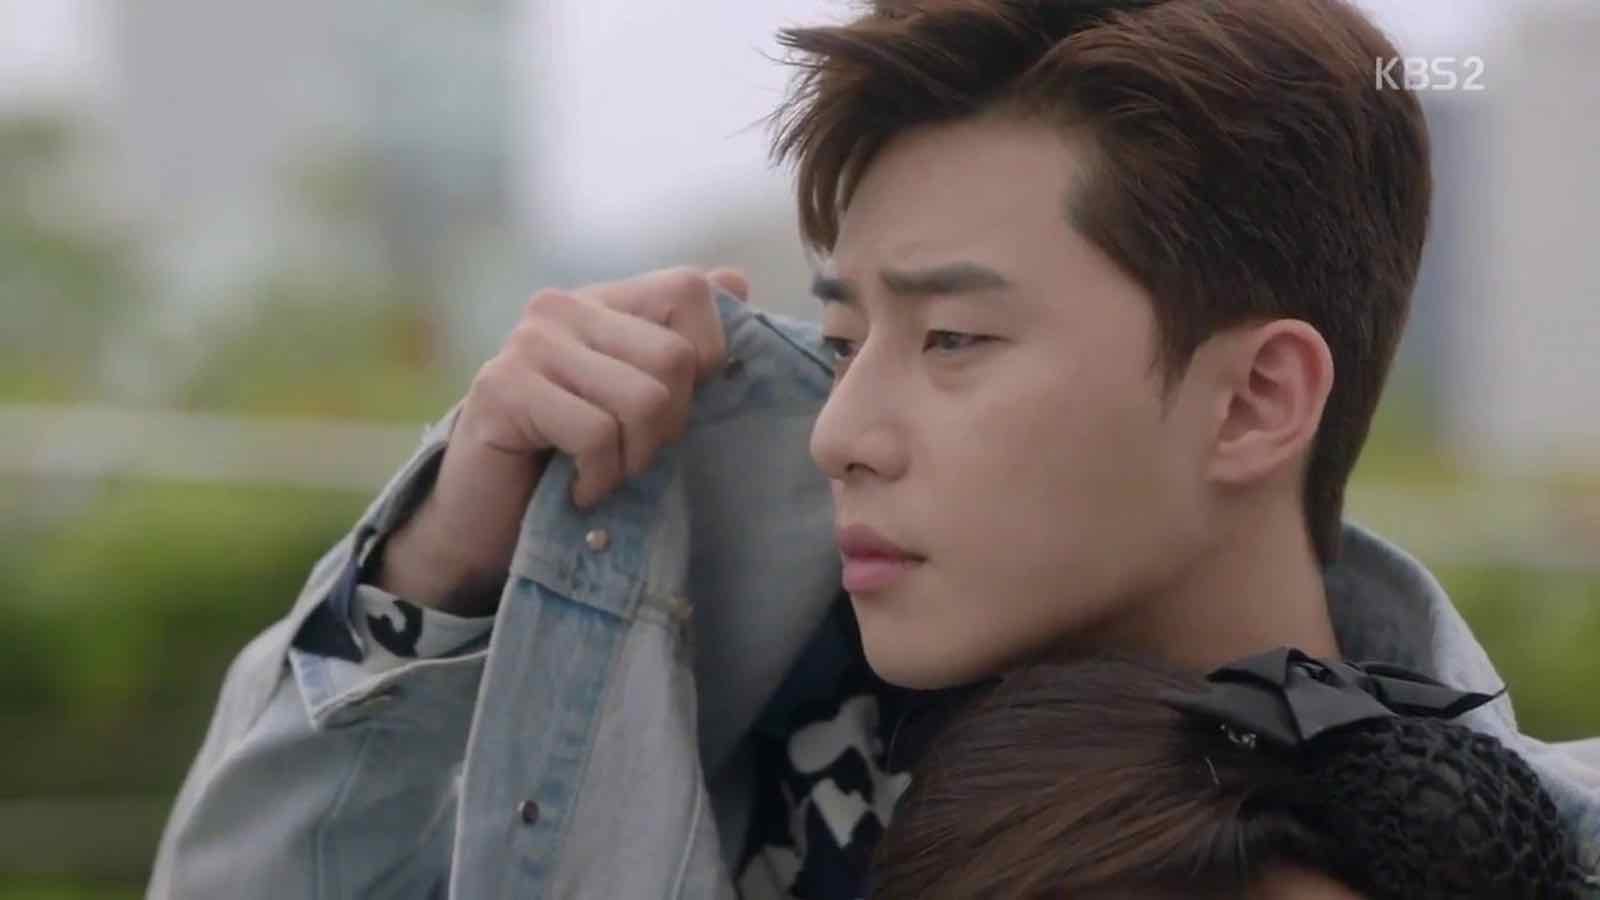 BTS love Park Seo Joon. Here's why you should too!